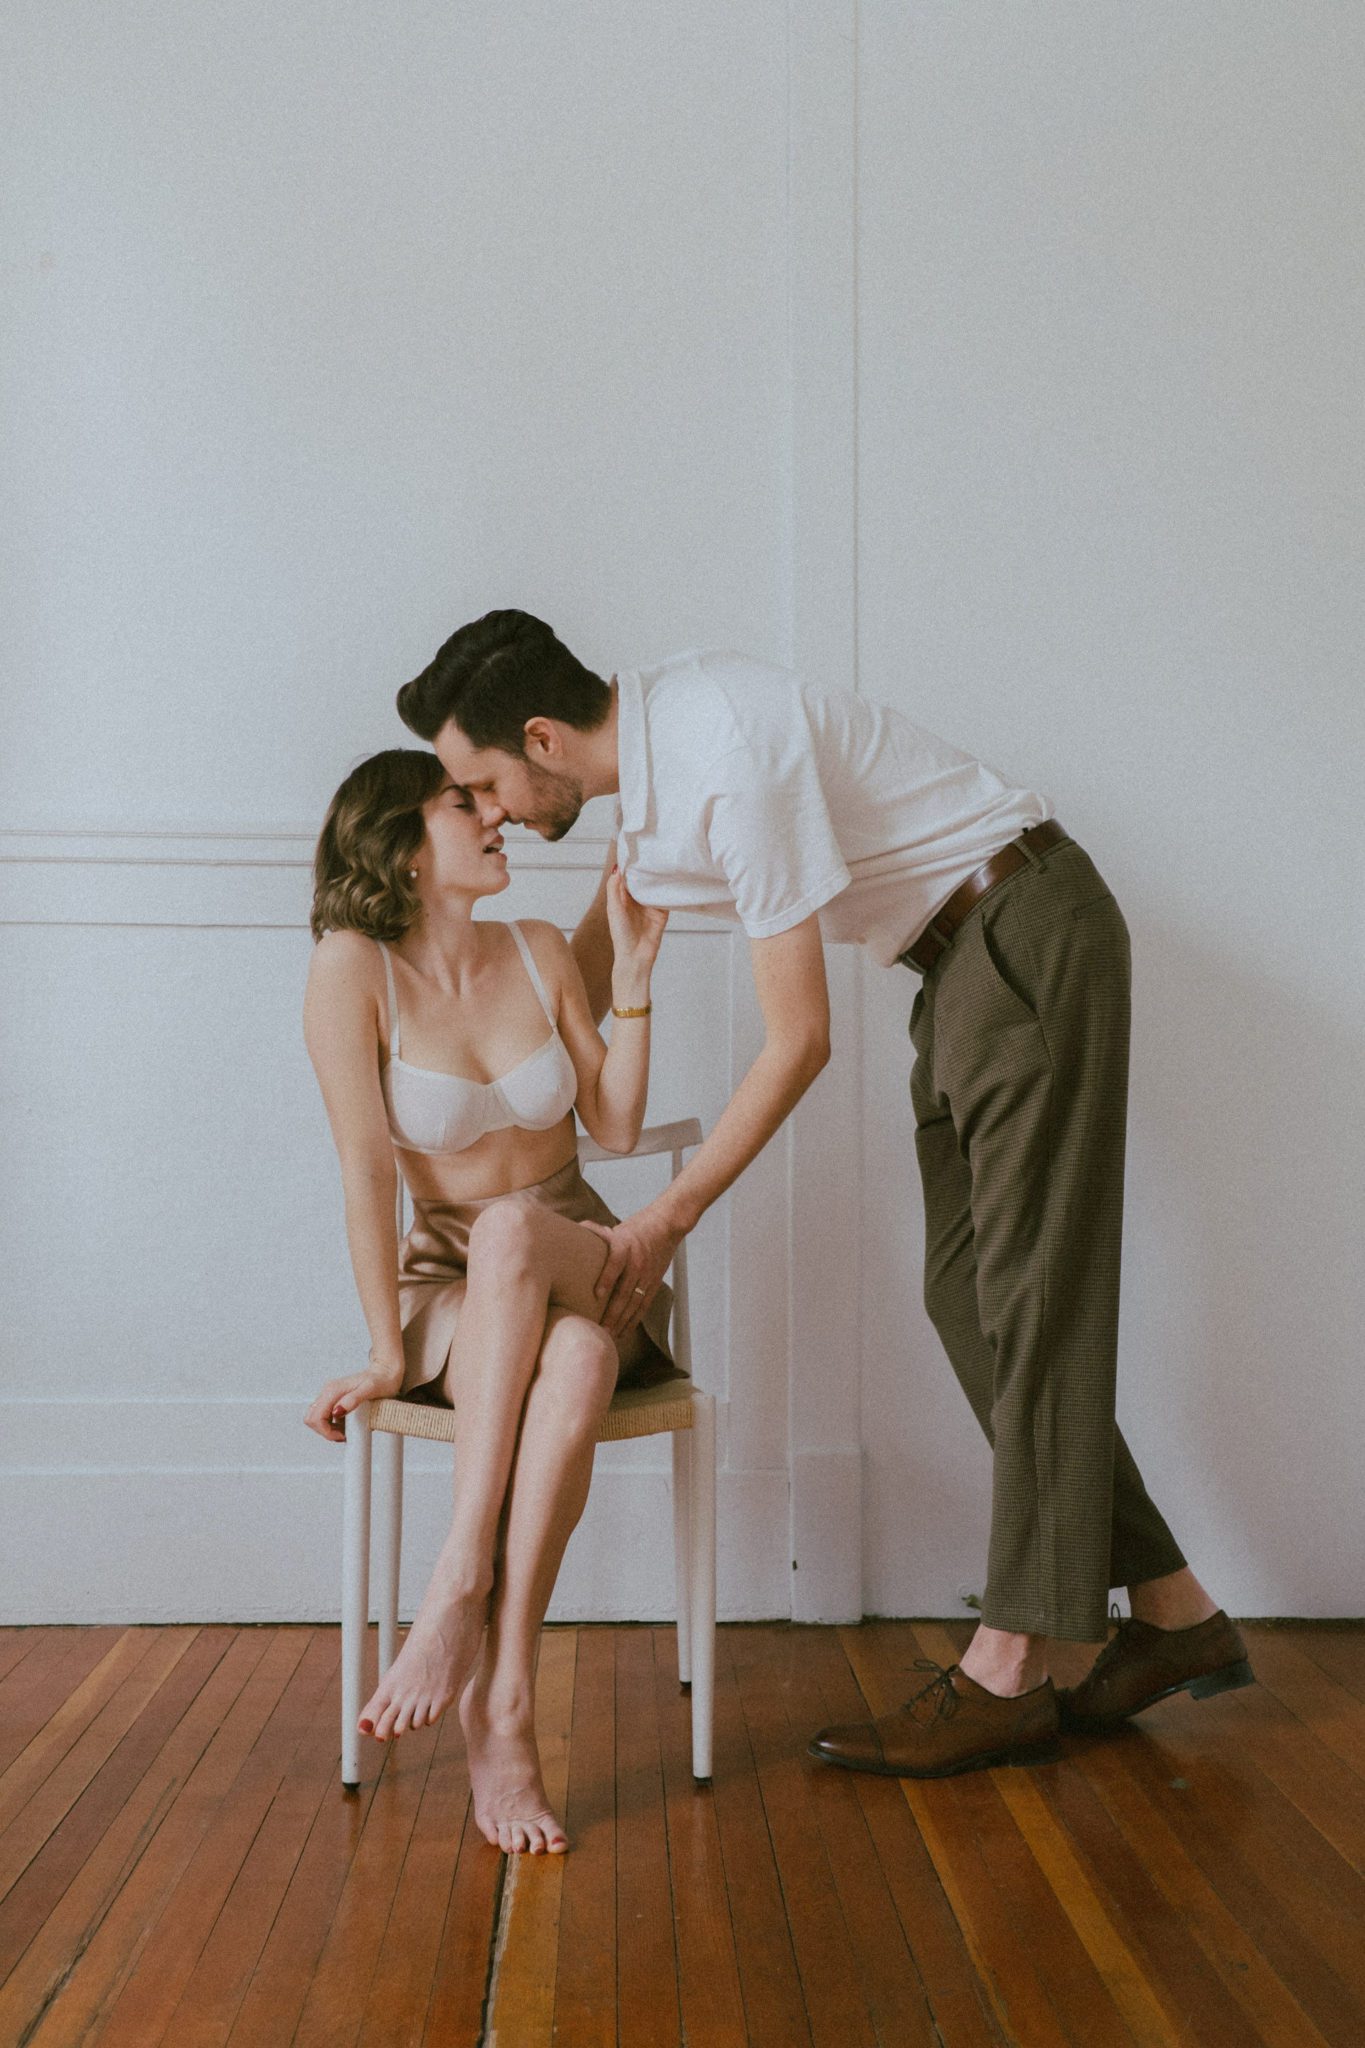 Retro romance for an intimate couples session.